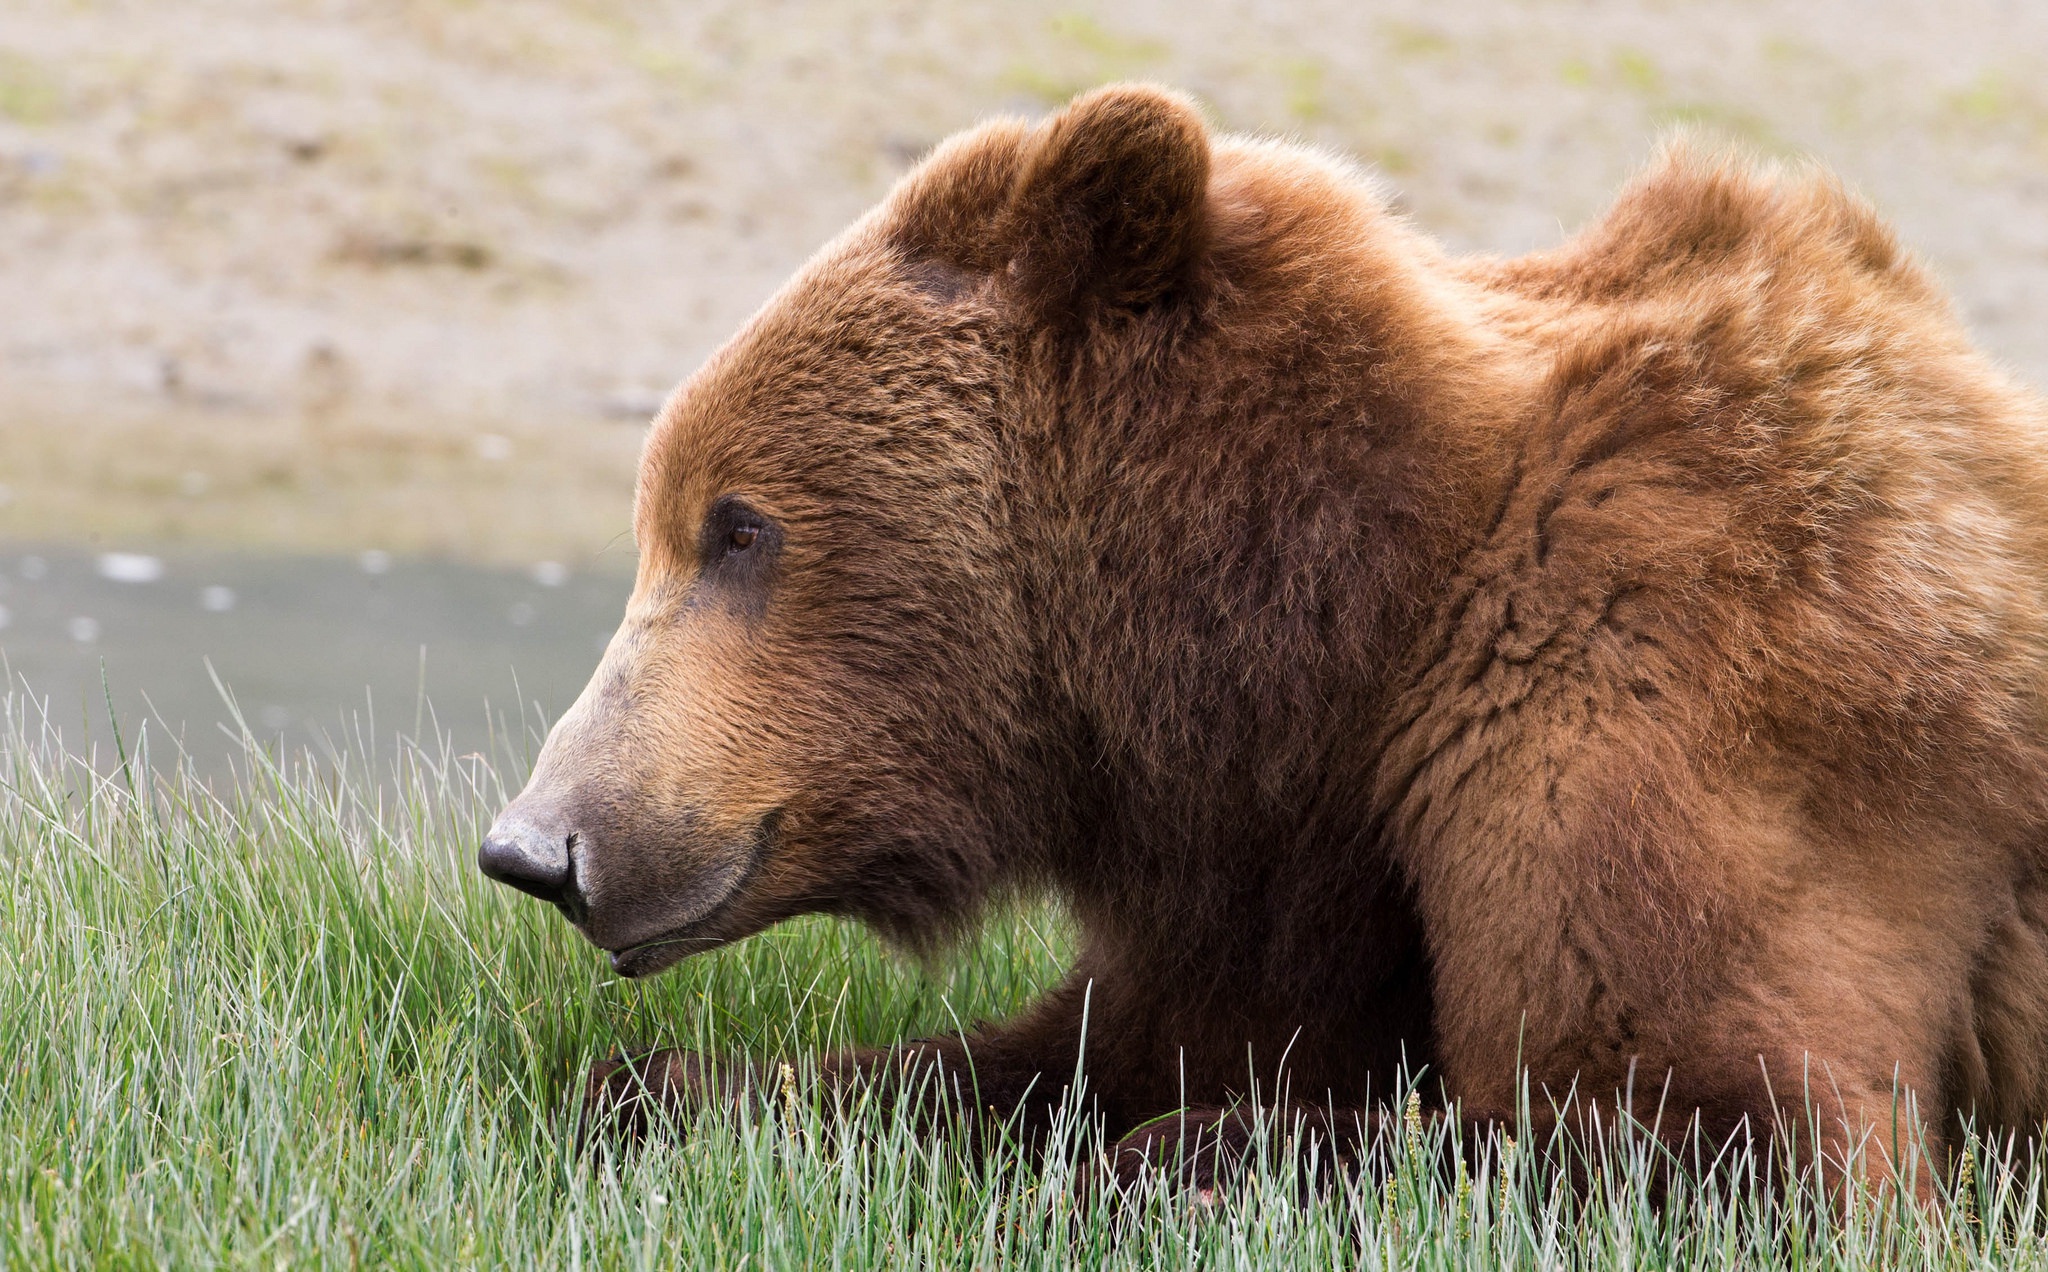 Download wallpaper grass, nature, brown bear, section animals in resolution...